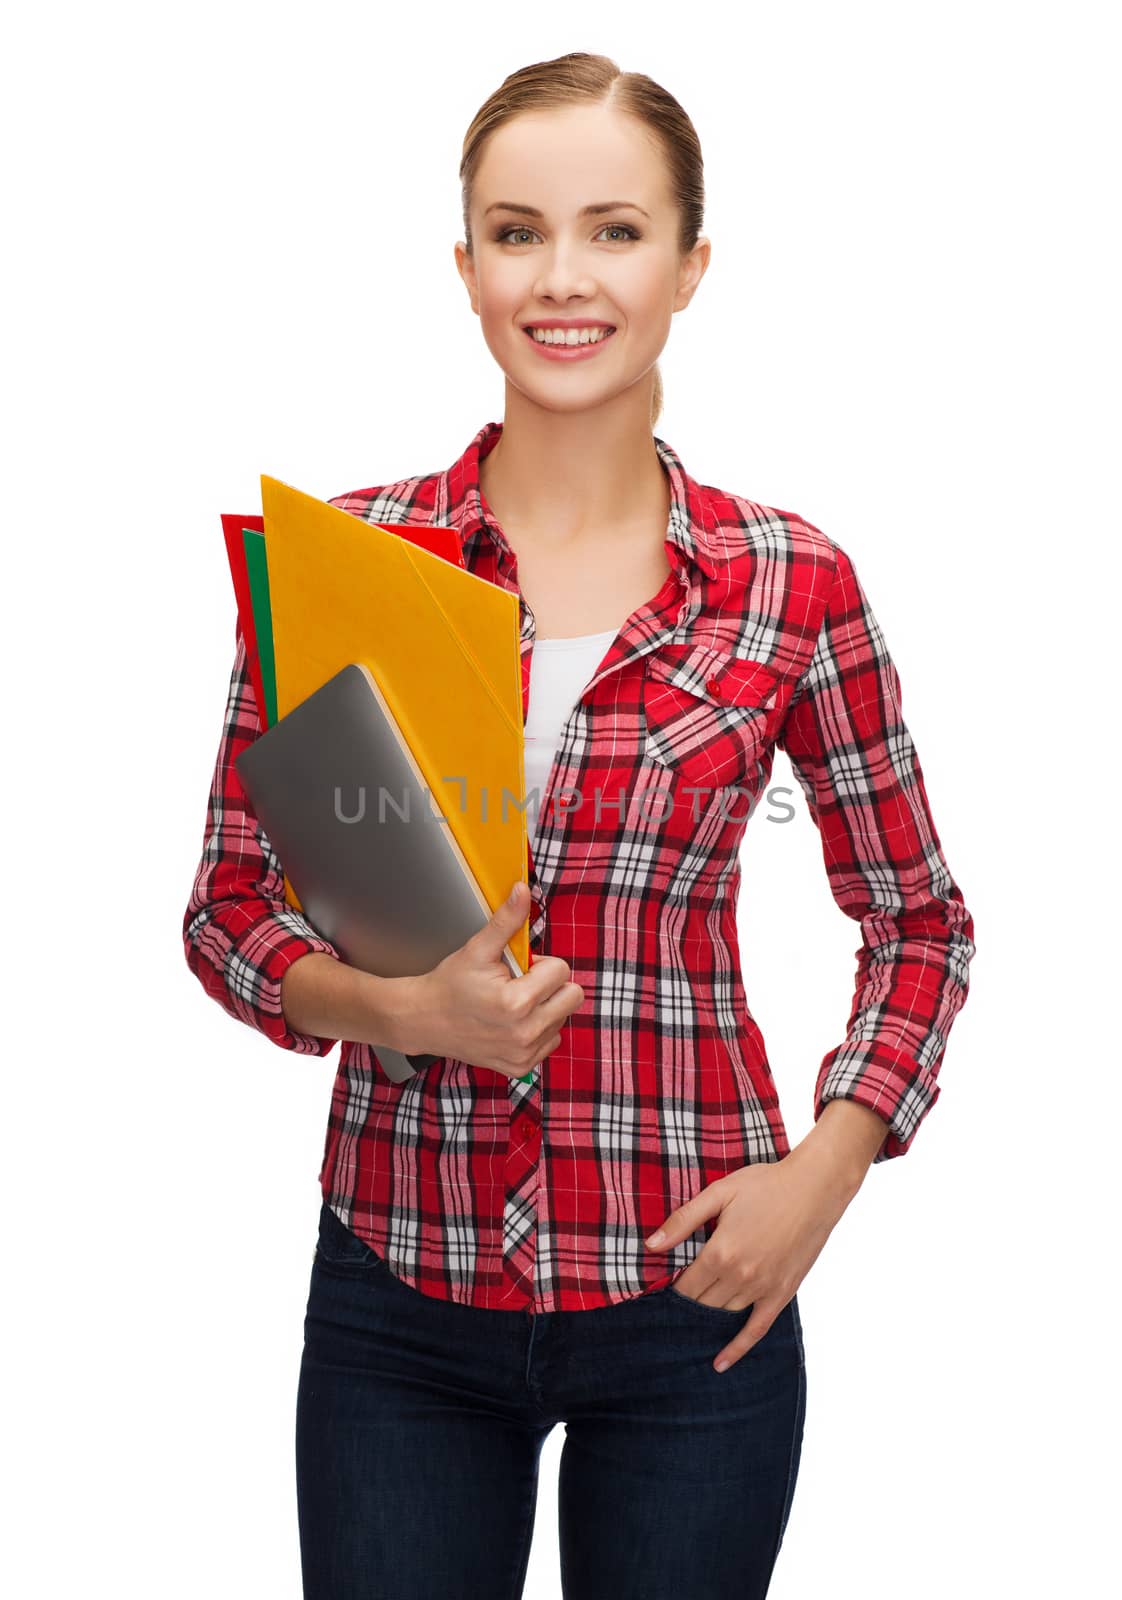 smiling student with folders and tablet pc by dolgachov